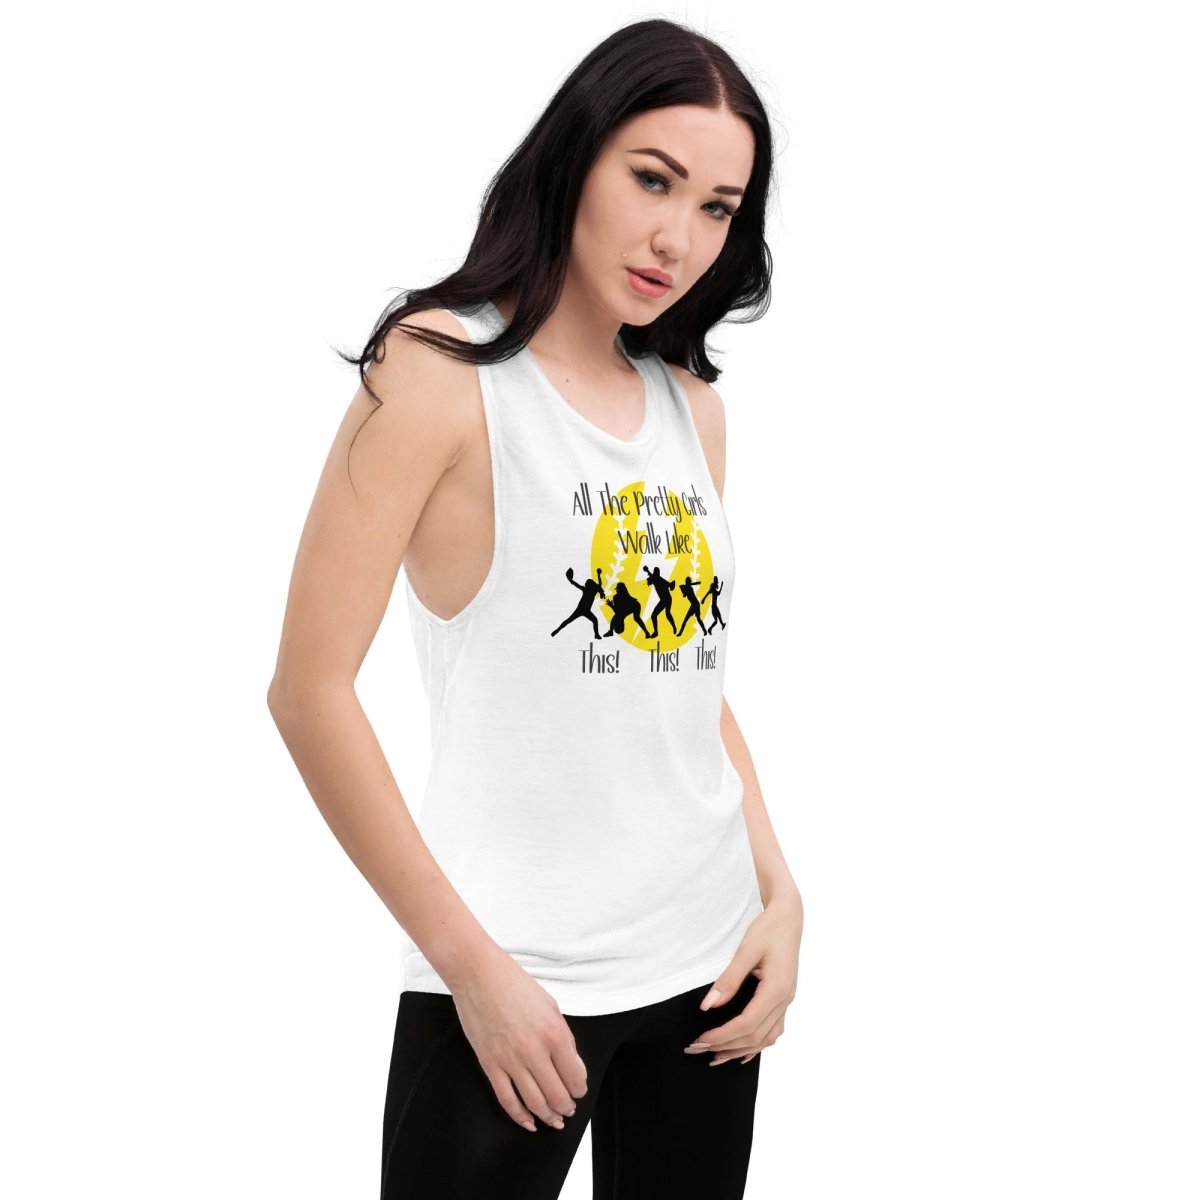 Walk Like This Woman's Muscle Tank